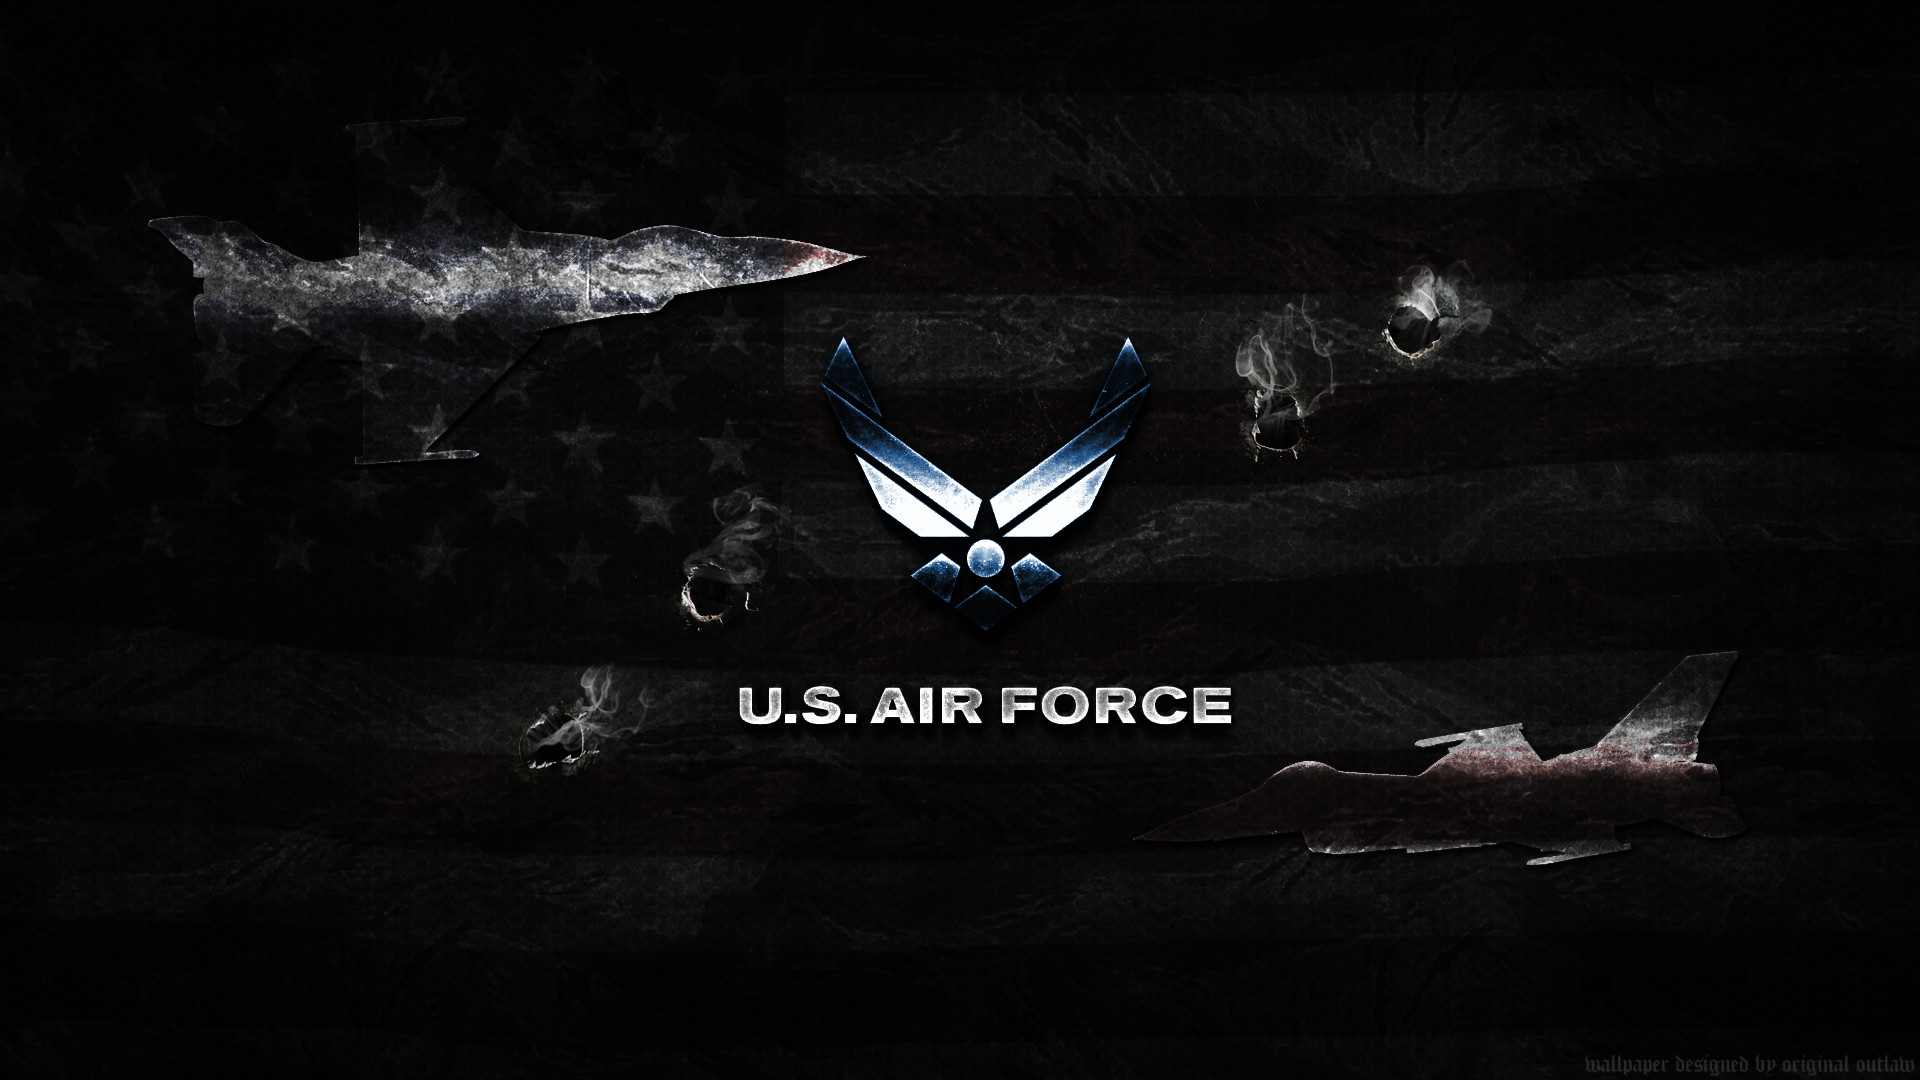 American Air Force Hd Widescreen Wallpapers Usaf Wallpaper Air, Widescreen, Usaf Wallpaper